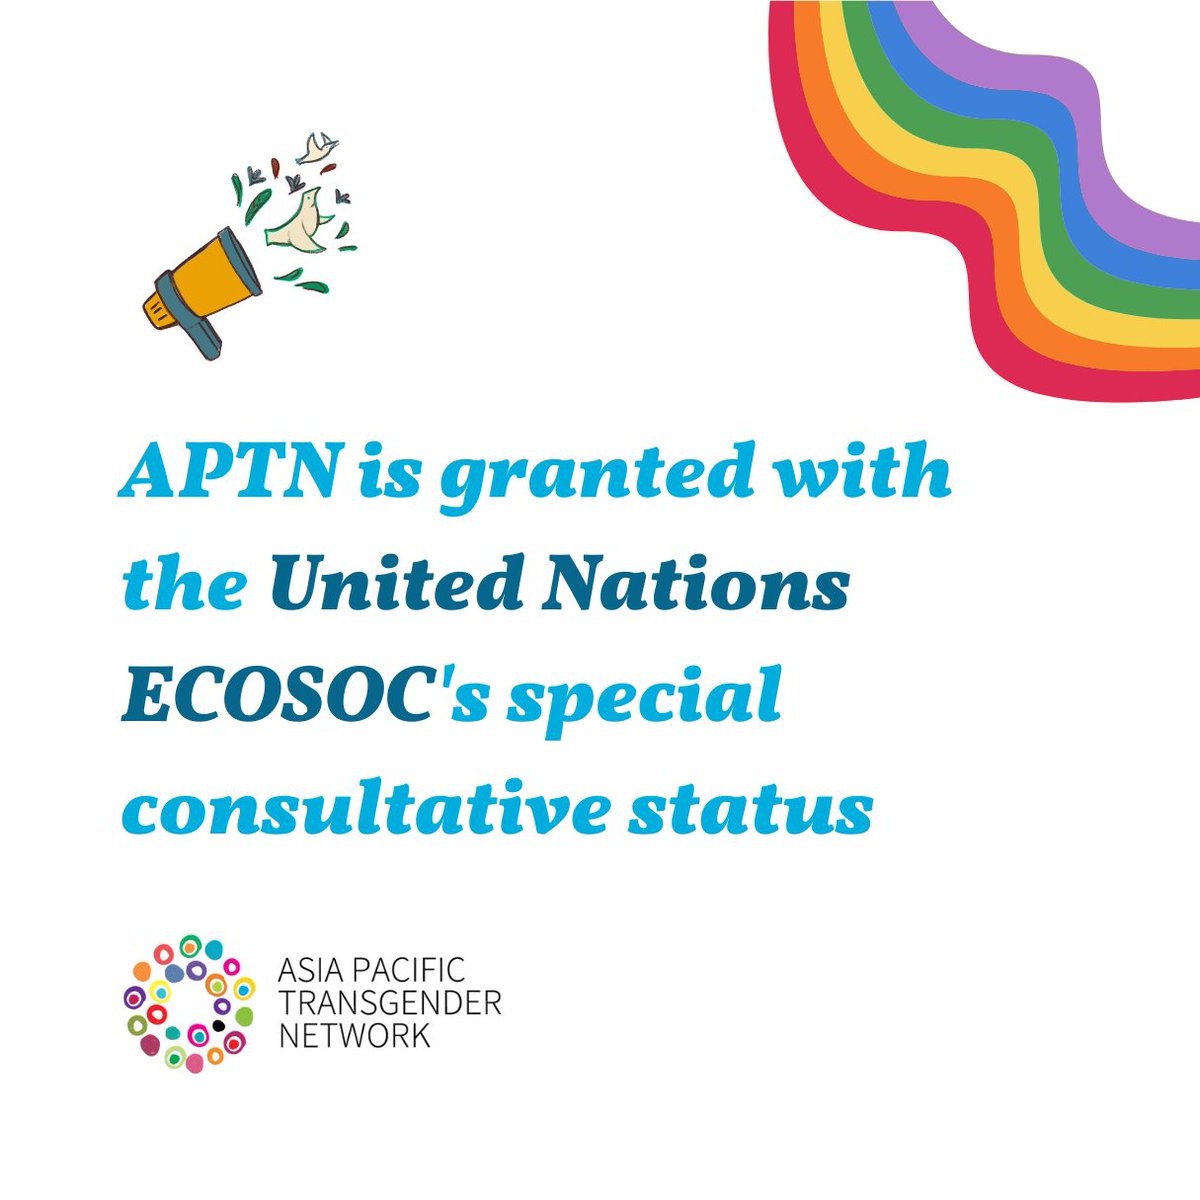 We are thrilled to announce that APTN has finally received the United Nations ECOSOC Special Consultative Status, fulfilling our promise in advancing human rights and sustainable development of trans and gender diverse communities across Asia Pacific.